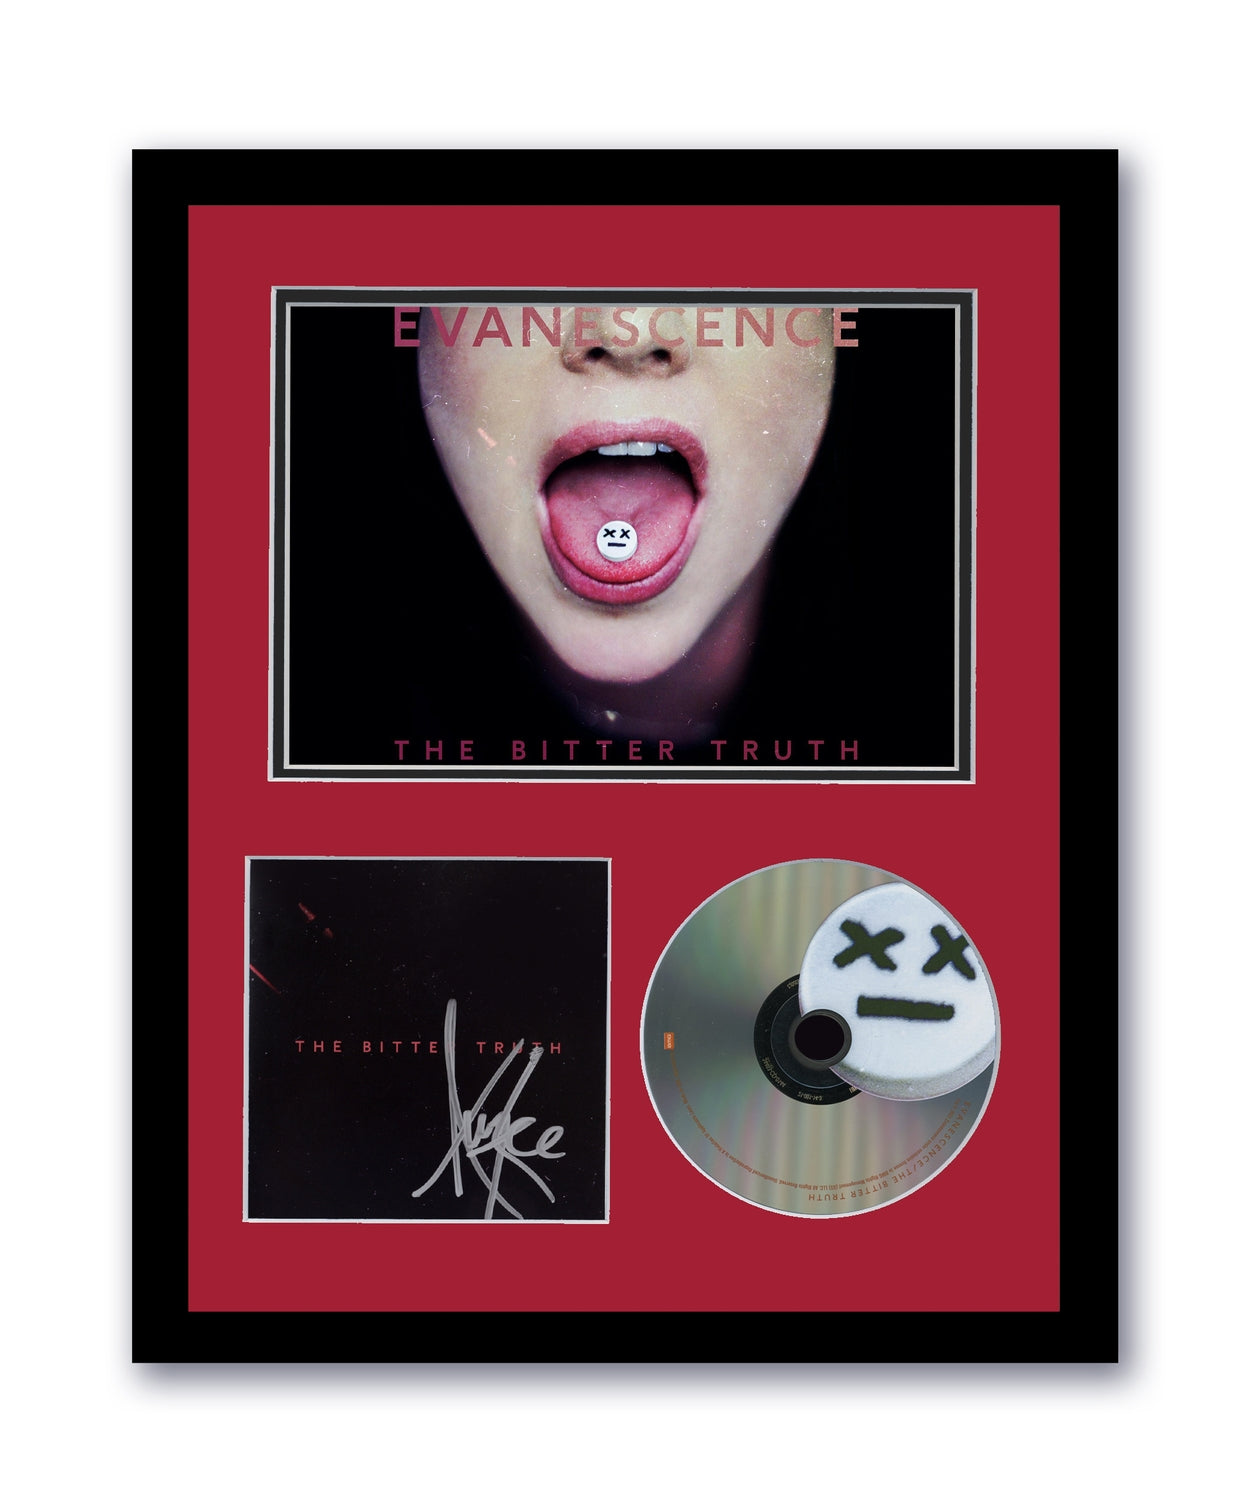 Evanescence Amy Lee Autographed 11x14 Custom Framed CD Photo Bitter Truth Signed ACOA 2